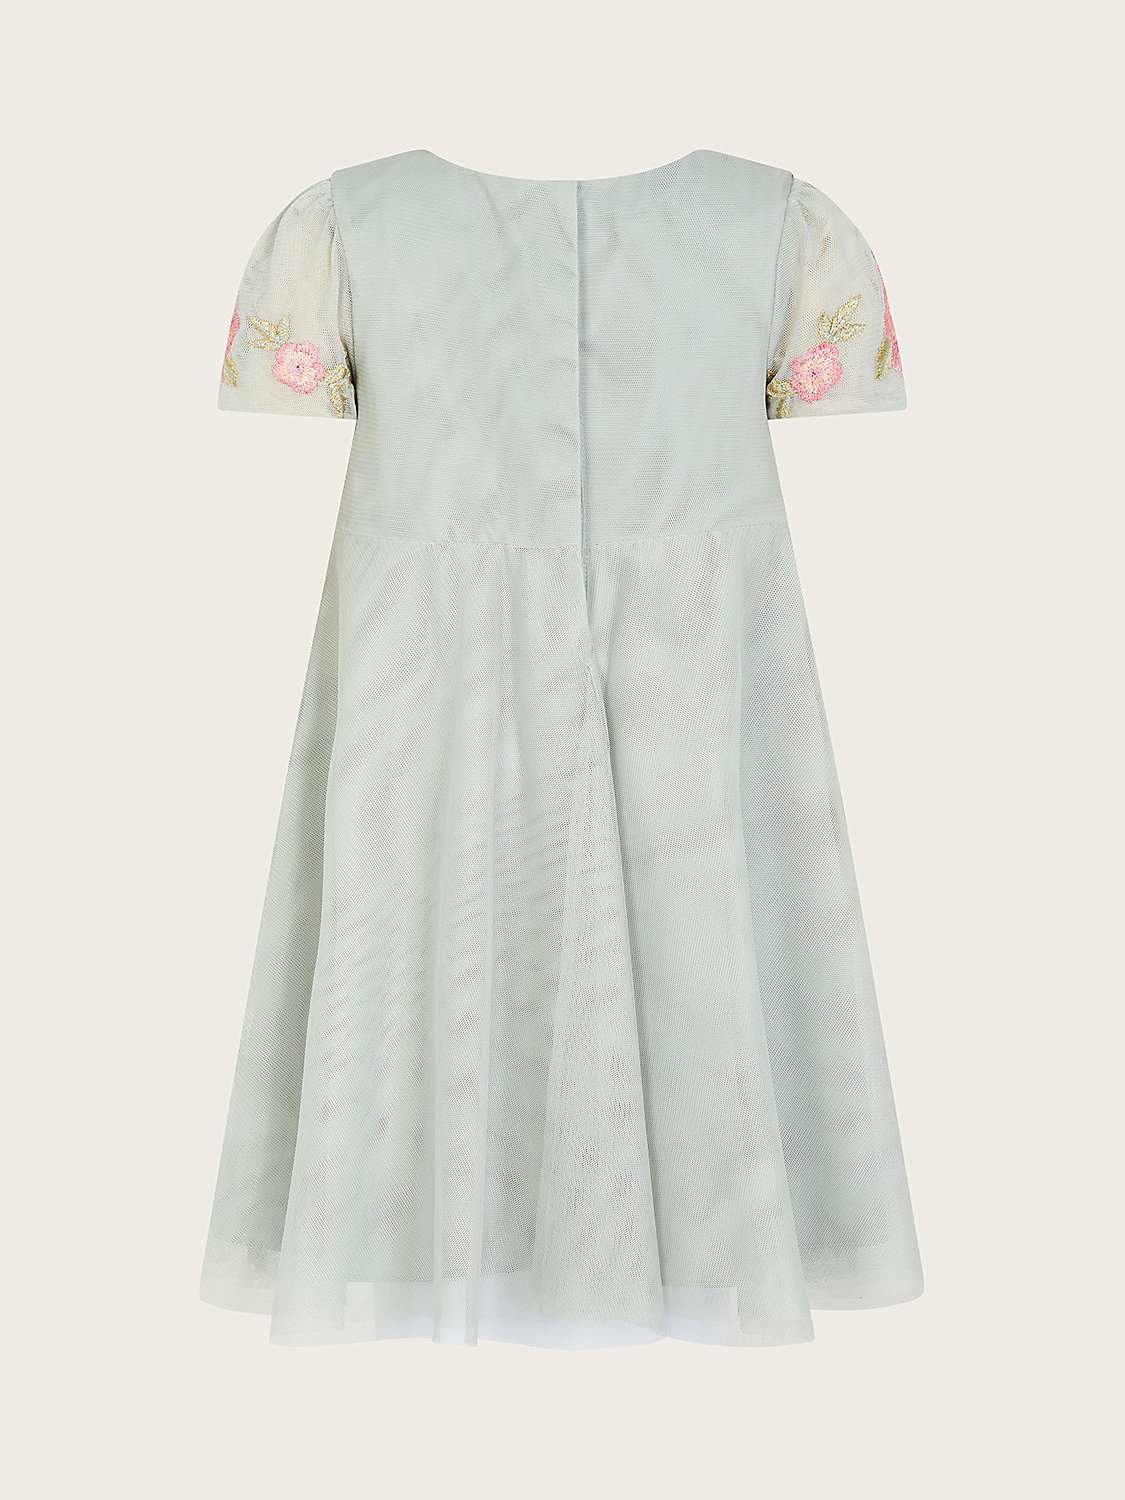 Buy Monsoon Baby Luna Floral Embroidered Occasion Dress, Green Online at johnlewis.com